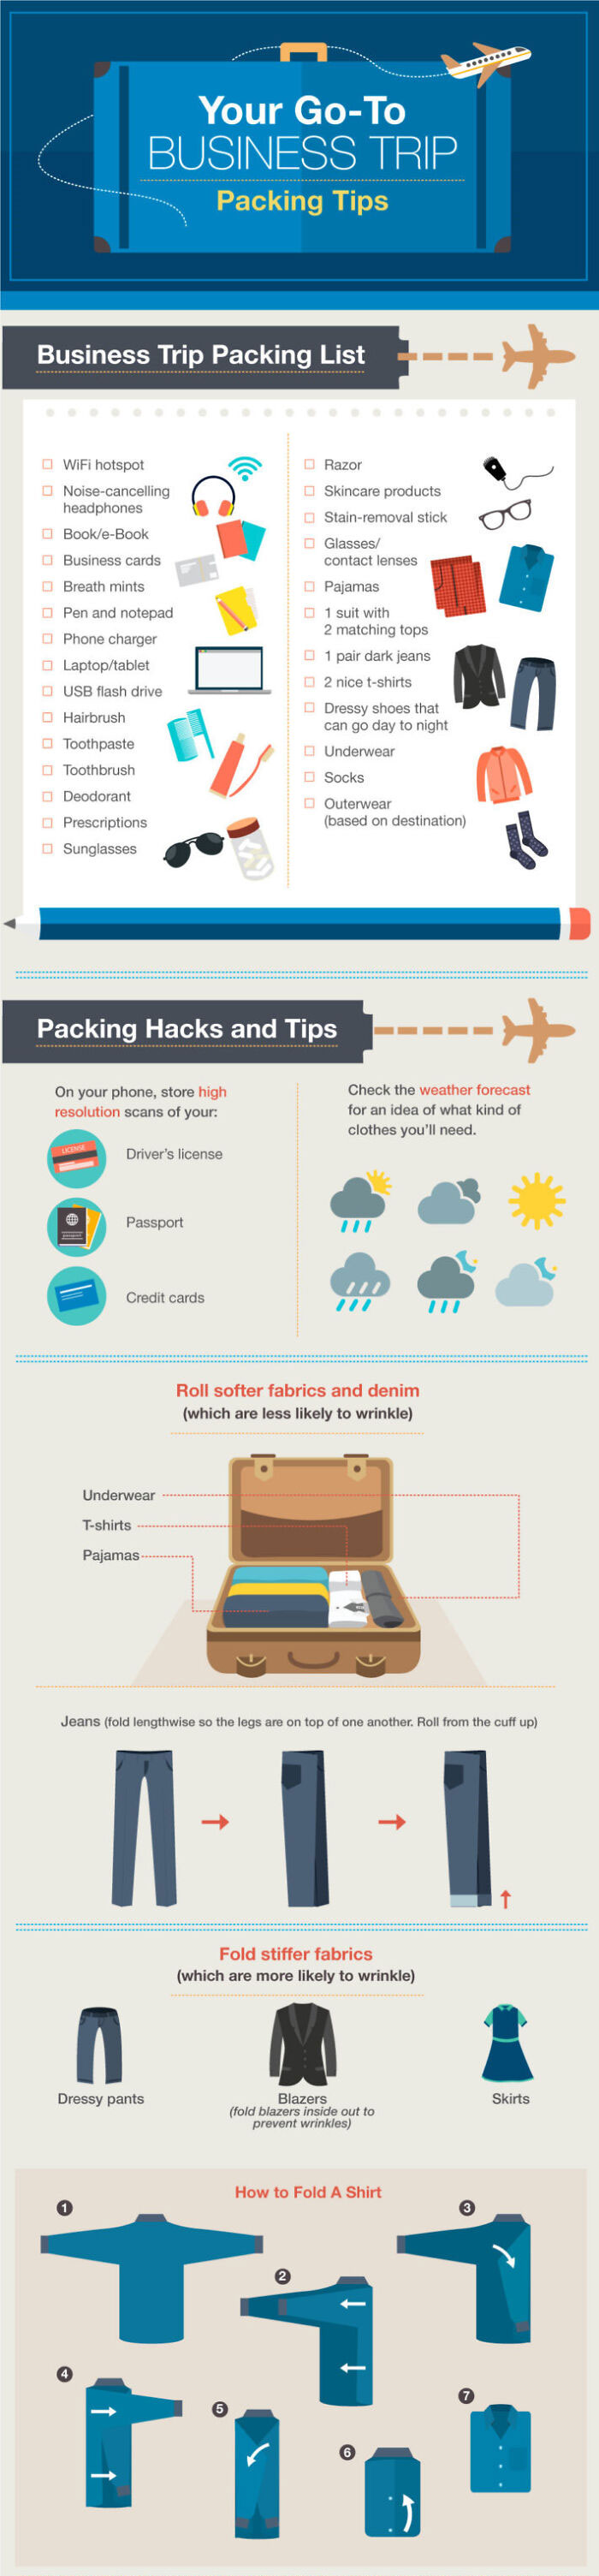 Go-To Business Trip Packing Tips